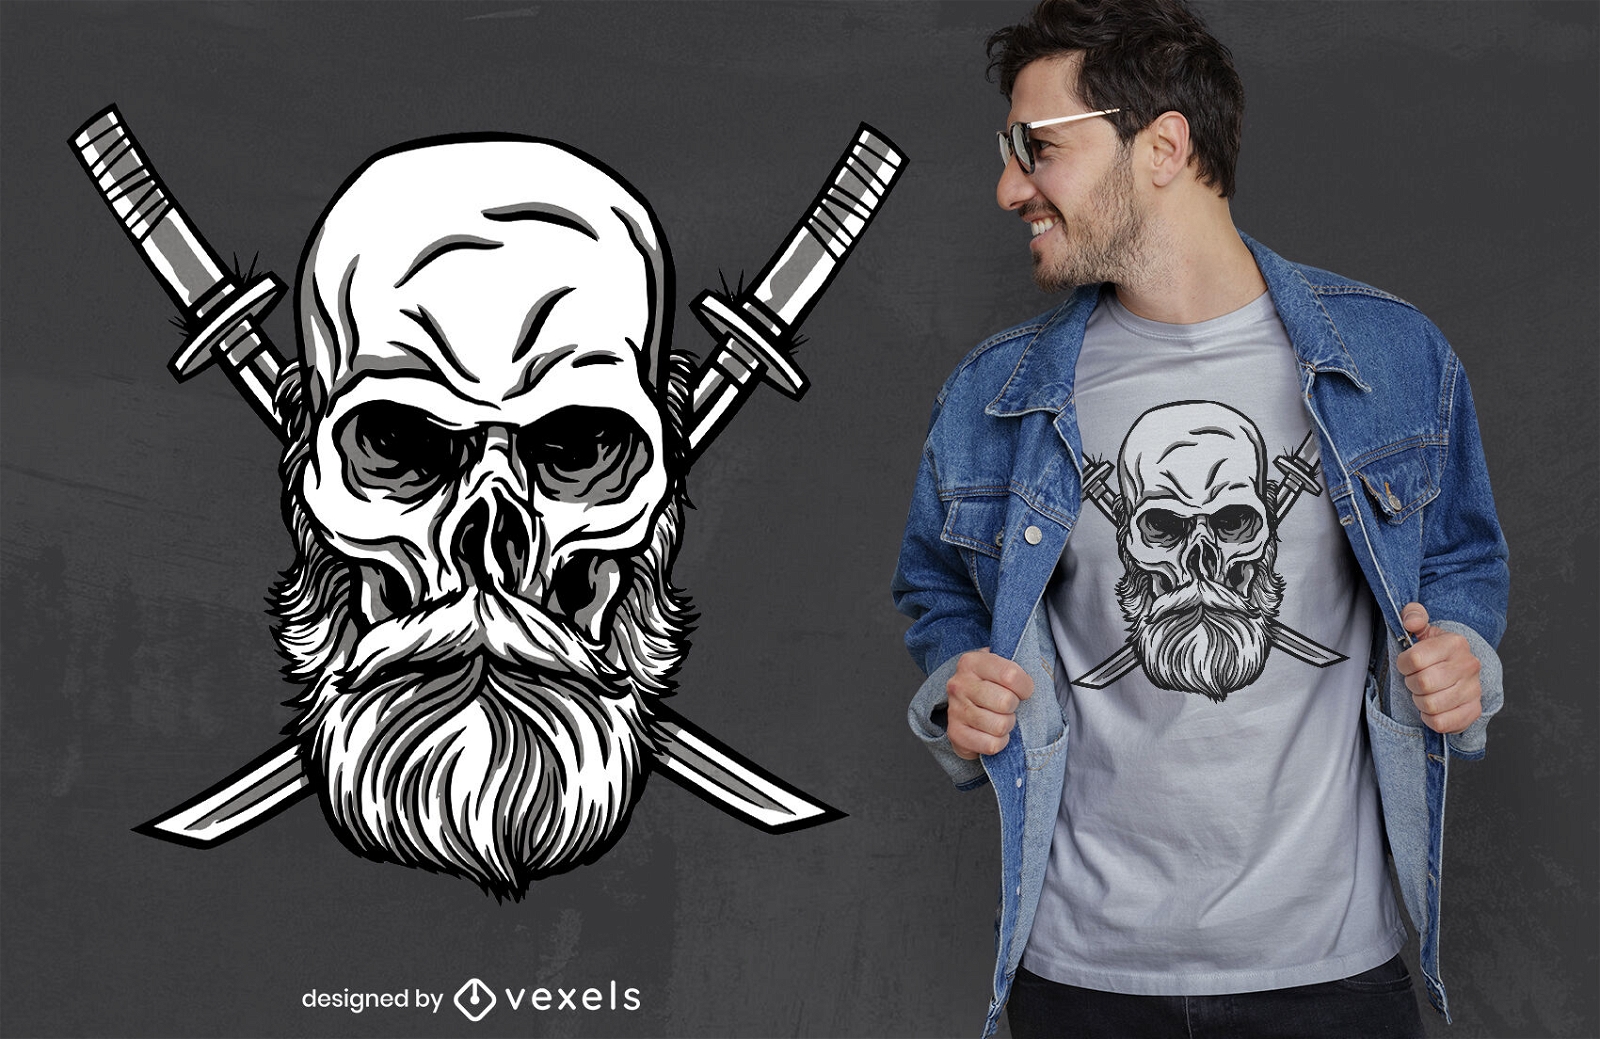 Skull with double swords t-shirt design